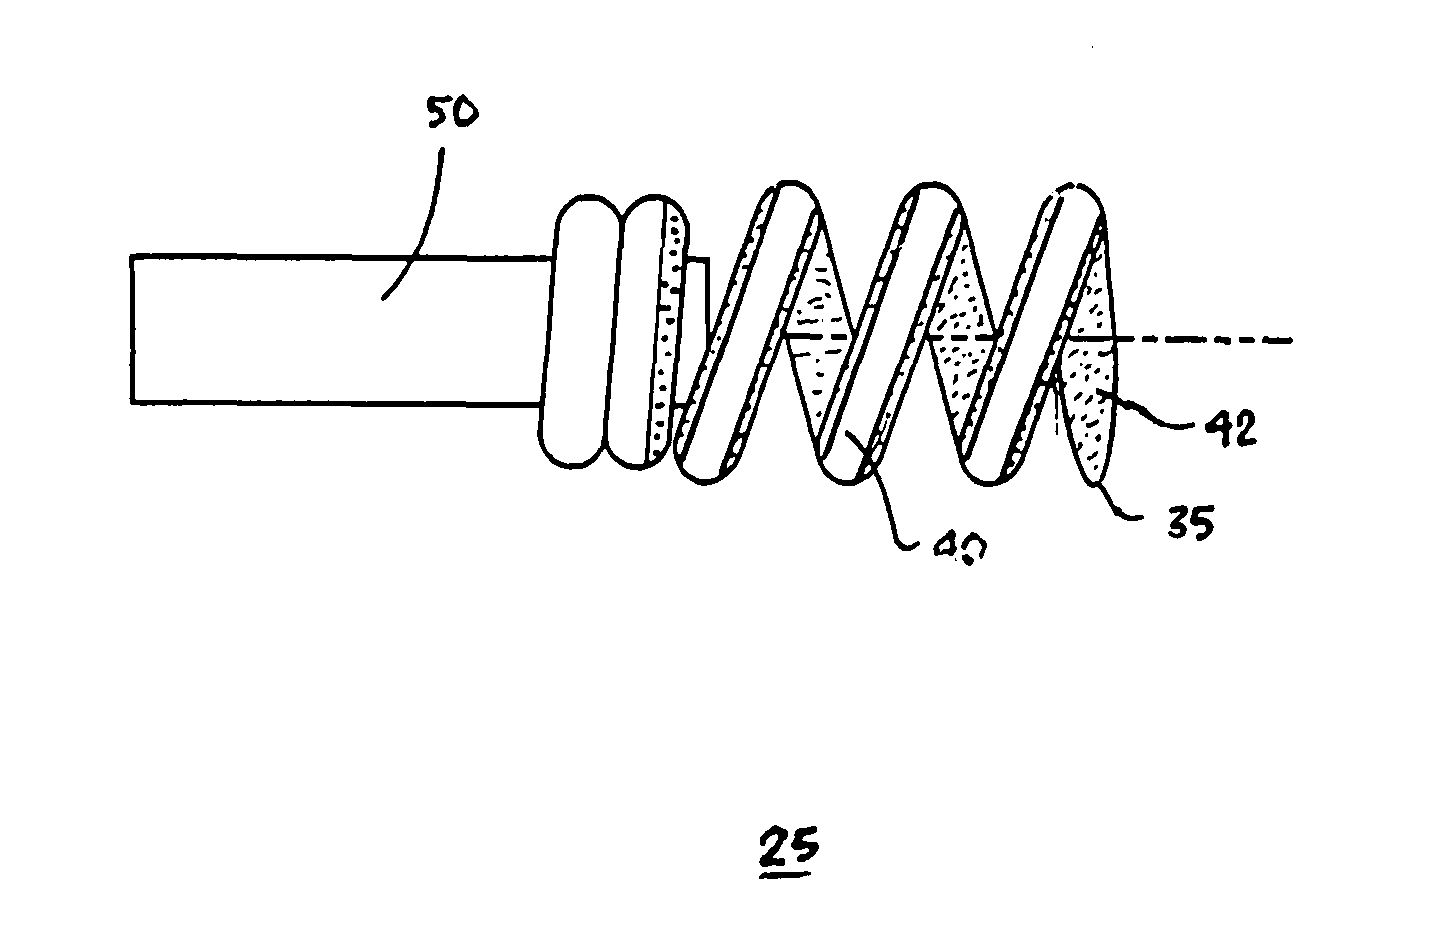 High impedance active fixation electrode of an electrical medical lead